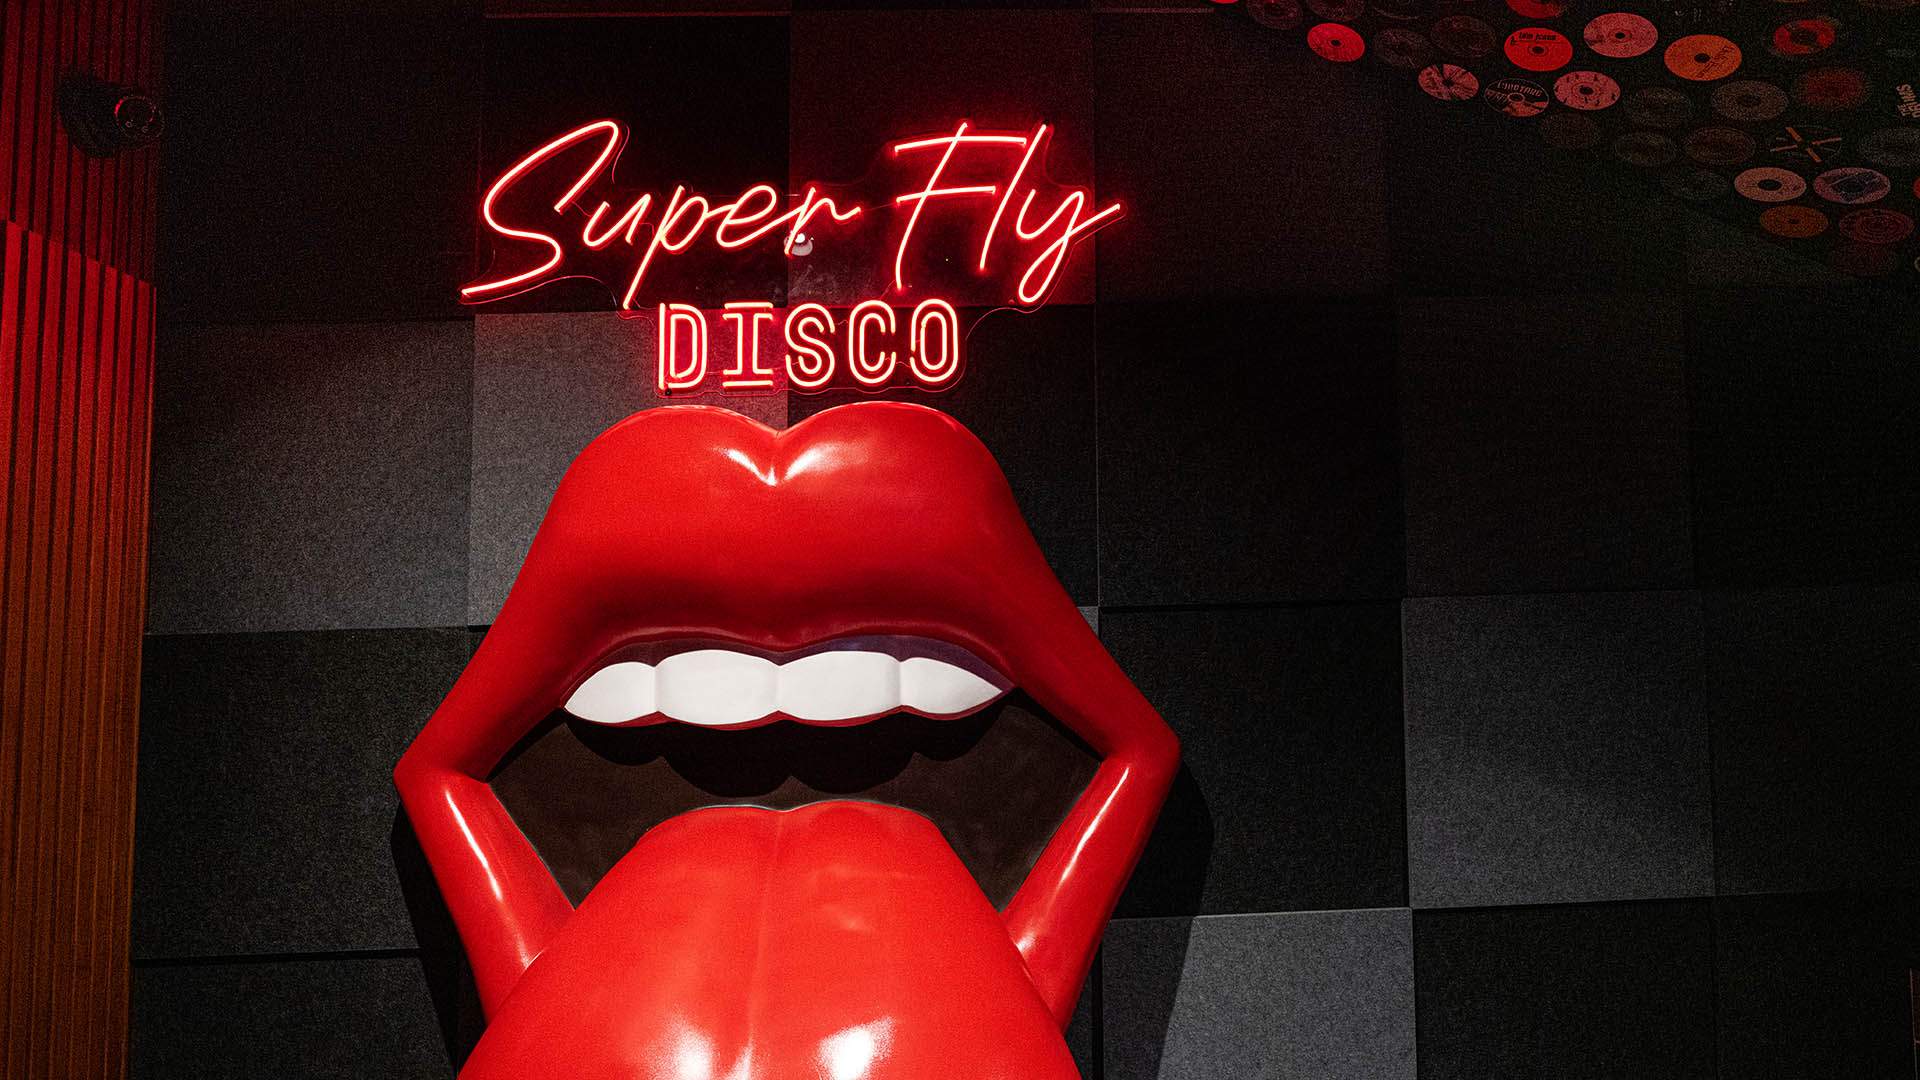 Retro Nightclub Superfly Disco Has Brought Its Light-Up Dance Floor to Alhambra Lounge's Old Digs